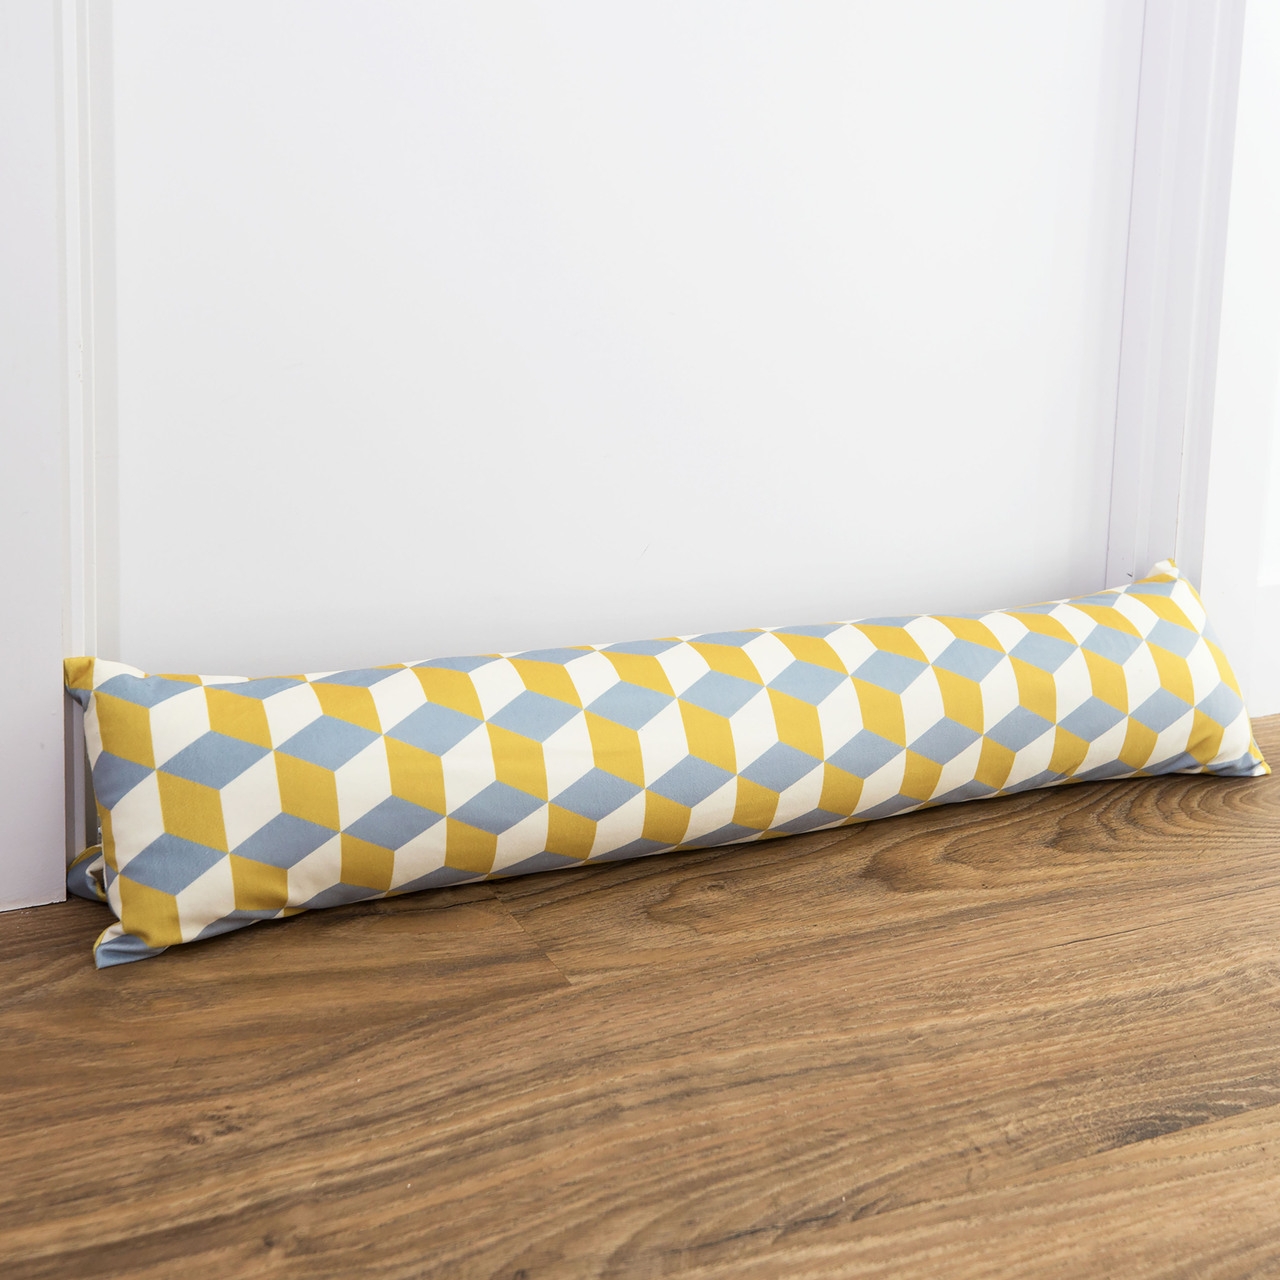 Celina Digby Luxury Velvet Draught Excluder – Cube Yellow (Available in 2 Sizes) Extra Large (110cm length)